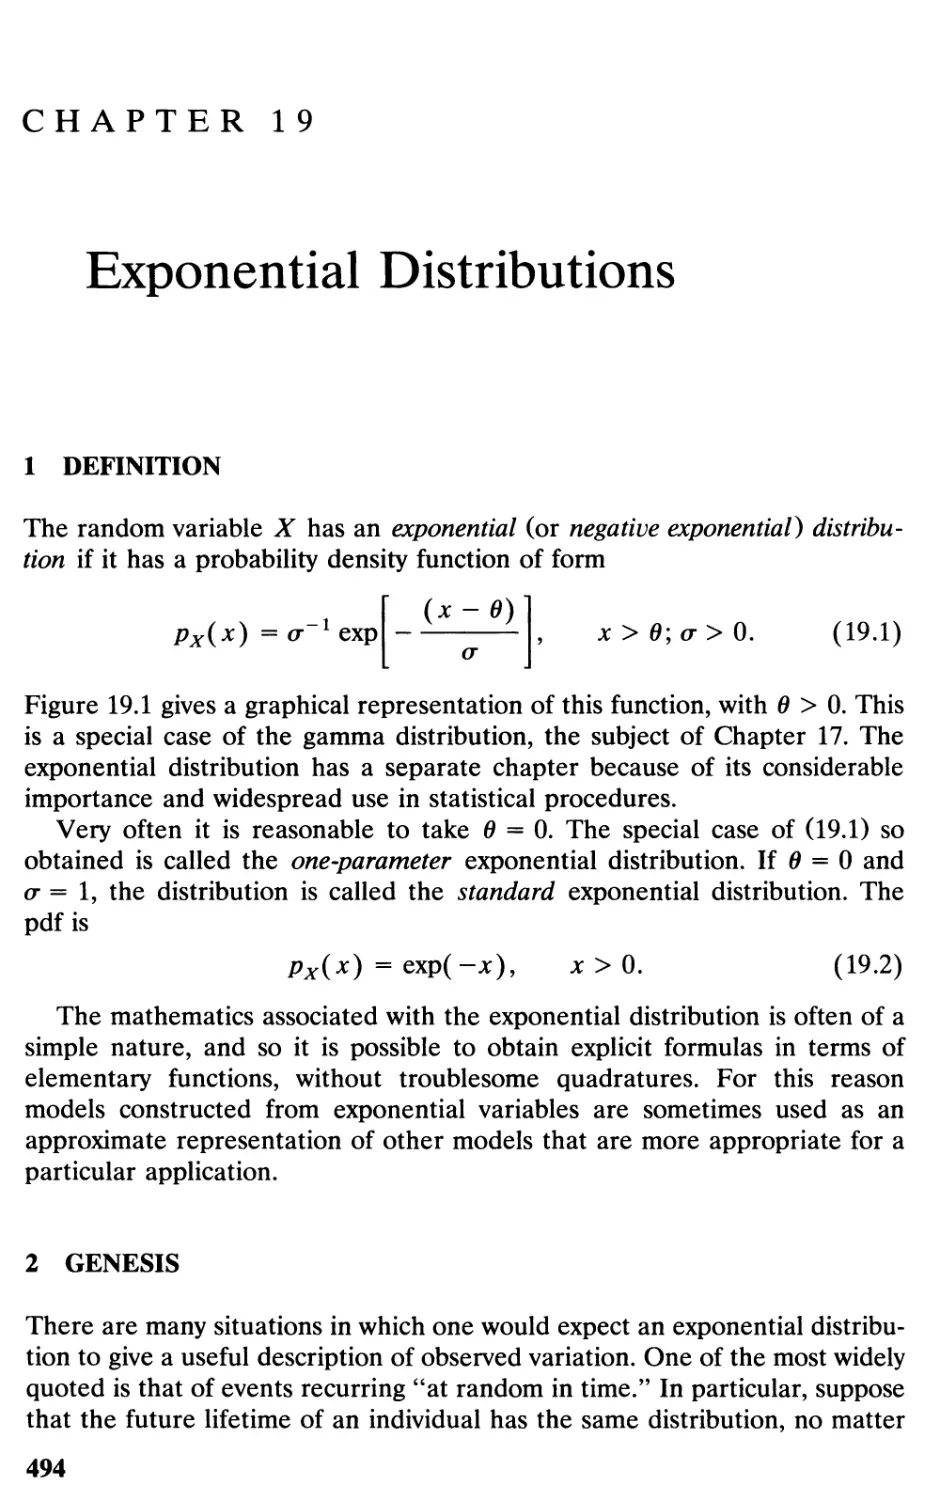 19 Exponential Distributions
2 Genesis, 494